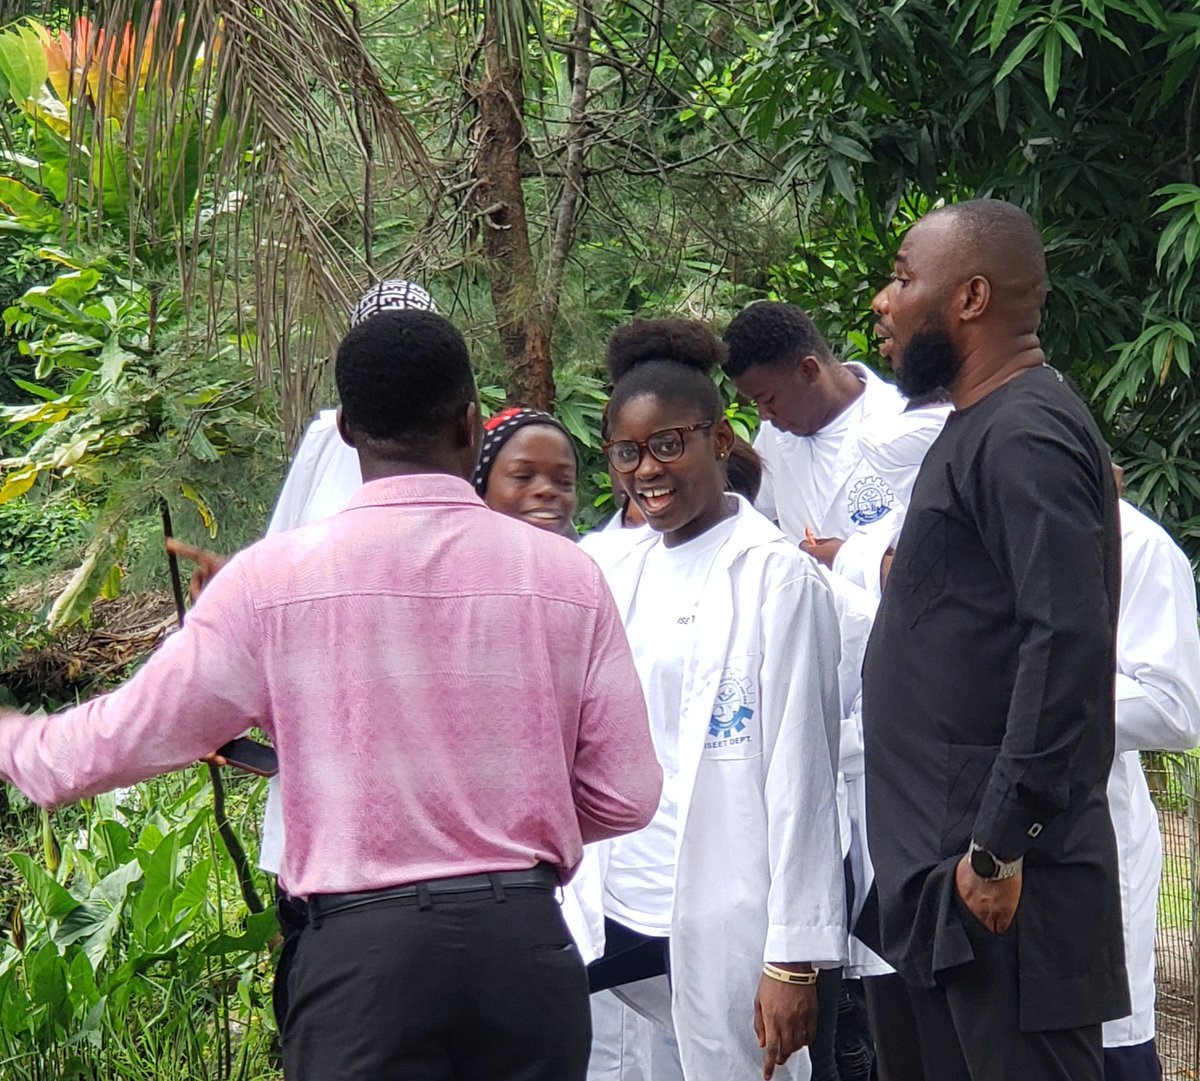 We had the INDUSTRIAL SAFETY AND ENVIRONMENTAL ENGINEERING TECHNOLOGY DEPARTMENT (ISEET) of the FEDERAL POLYTECHNIC OF OIL AND GAS, BONNY visit the park for some Insight. 

#FINIMANATUREPARK #ncfeducation #NatureAppreciation